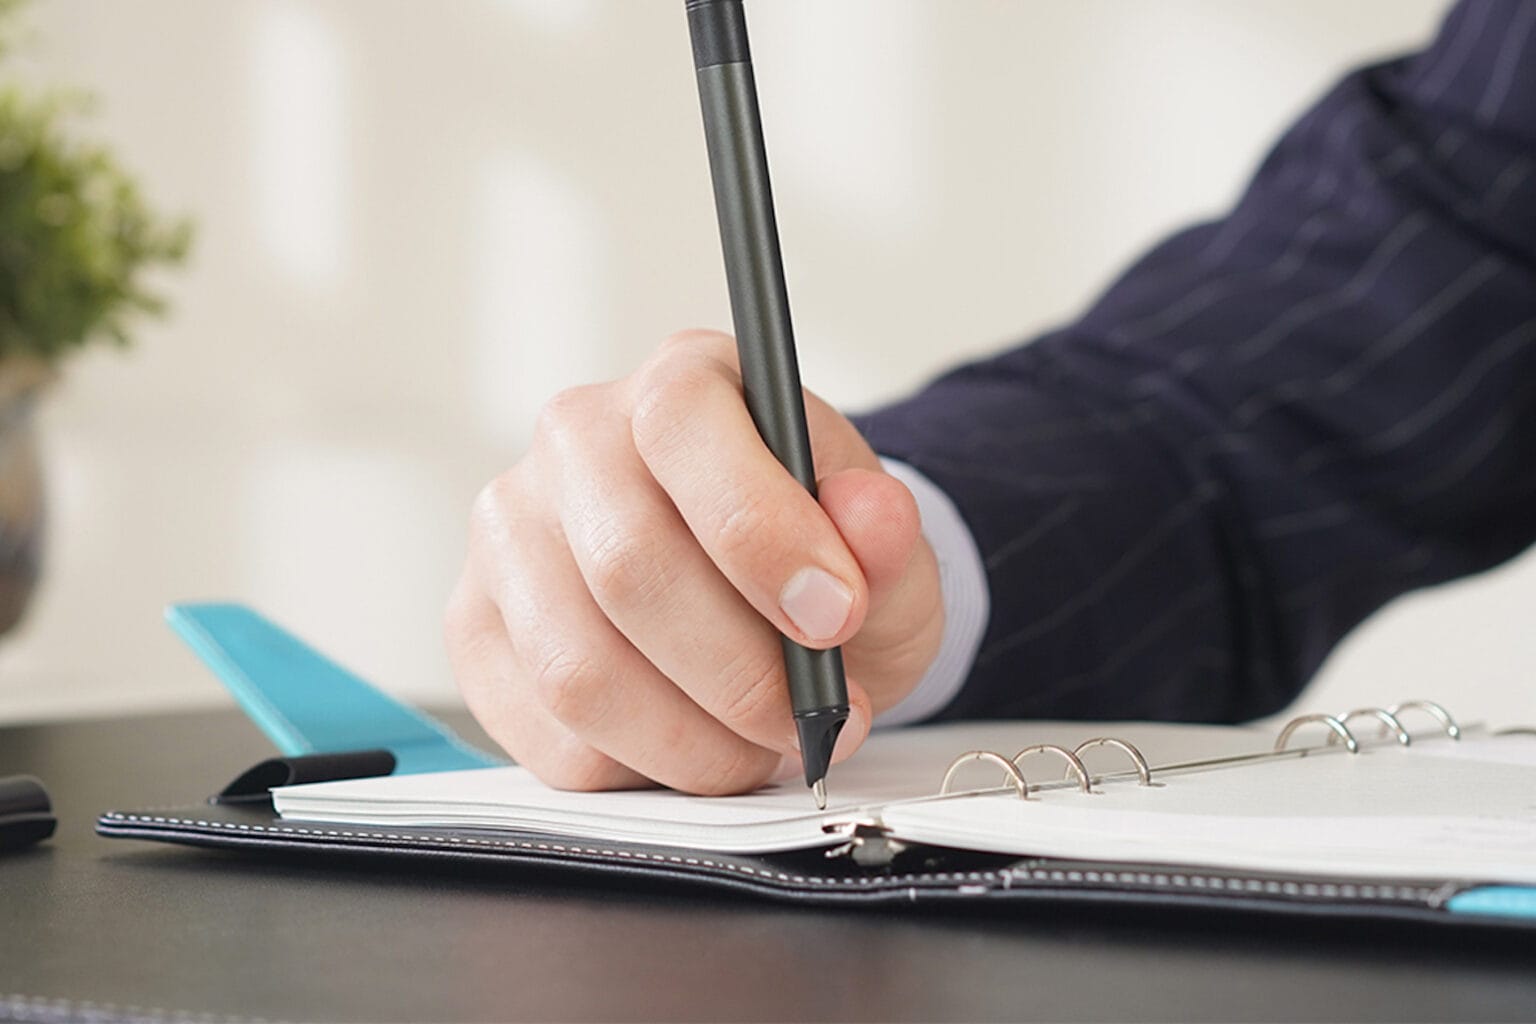 Take next-generation notes with this smart pen.